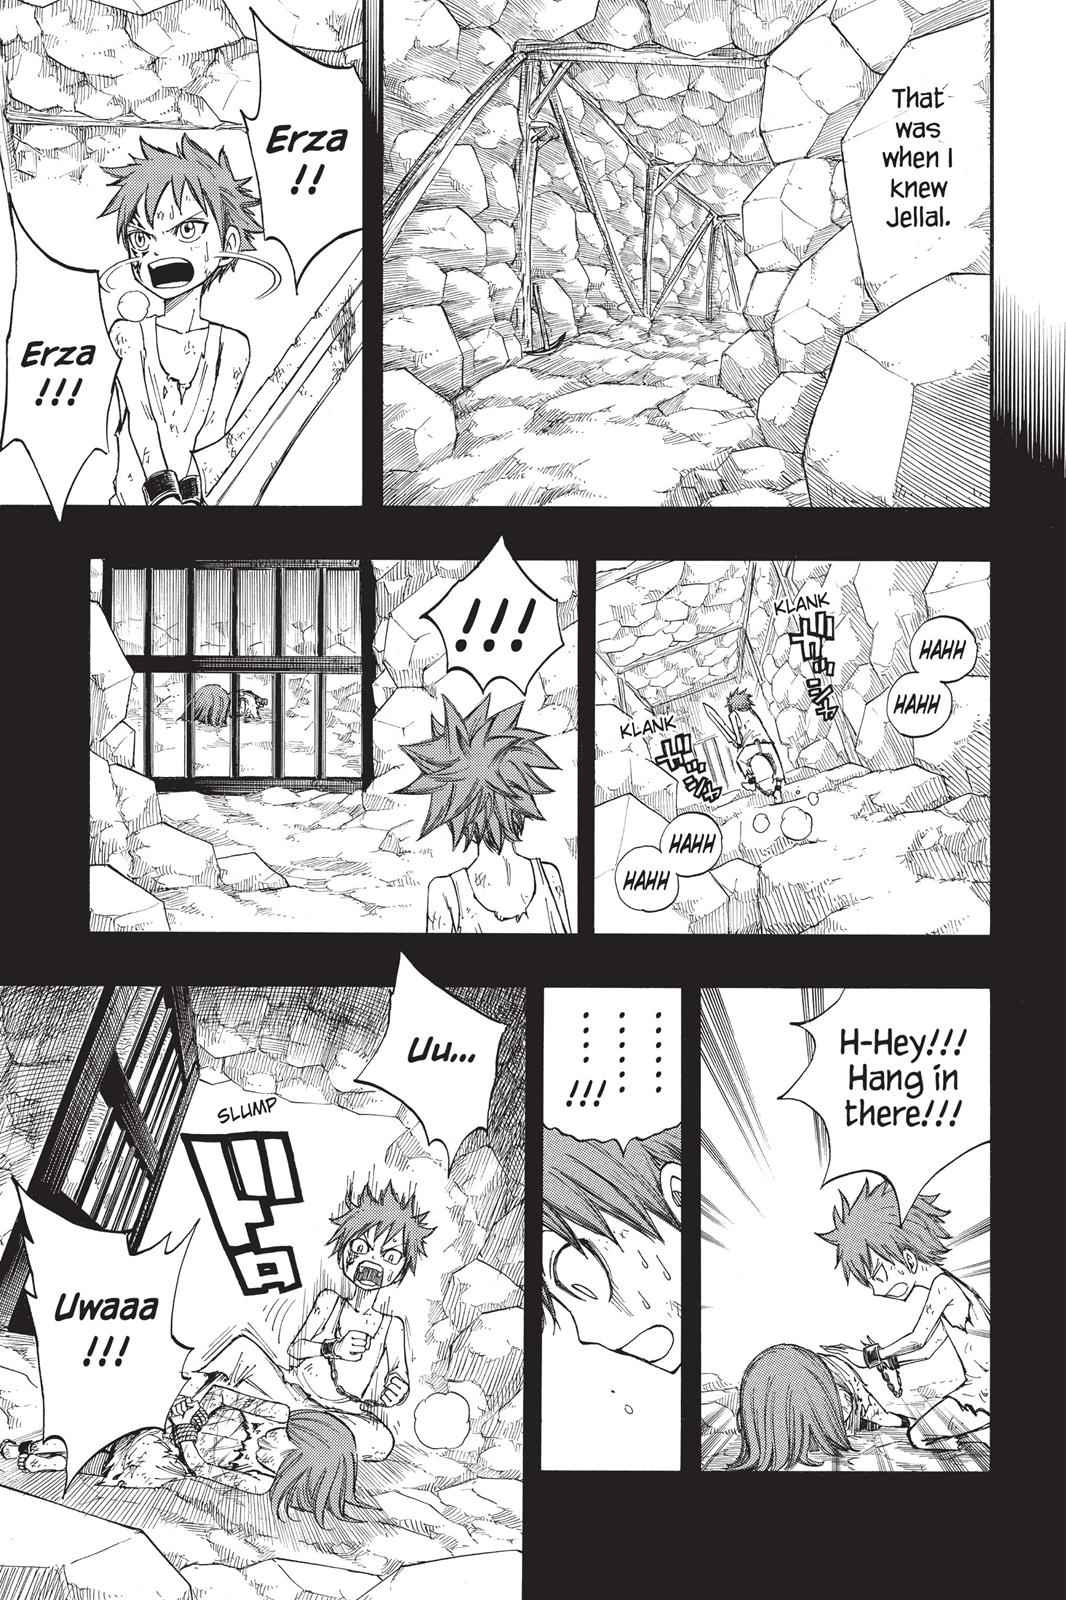  Chapter 80 image 015